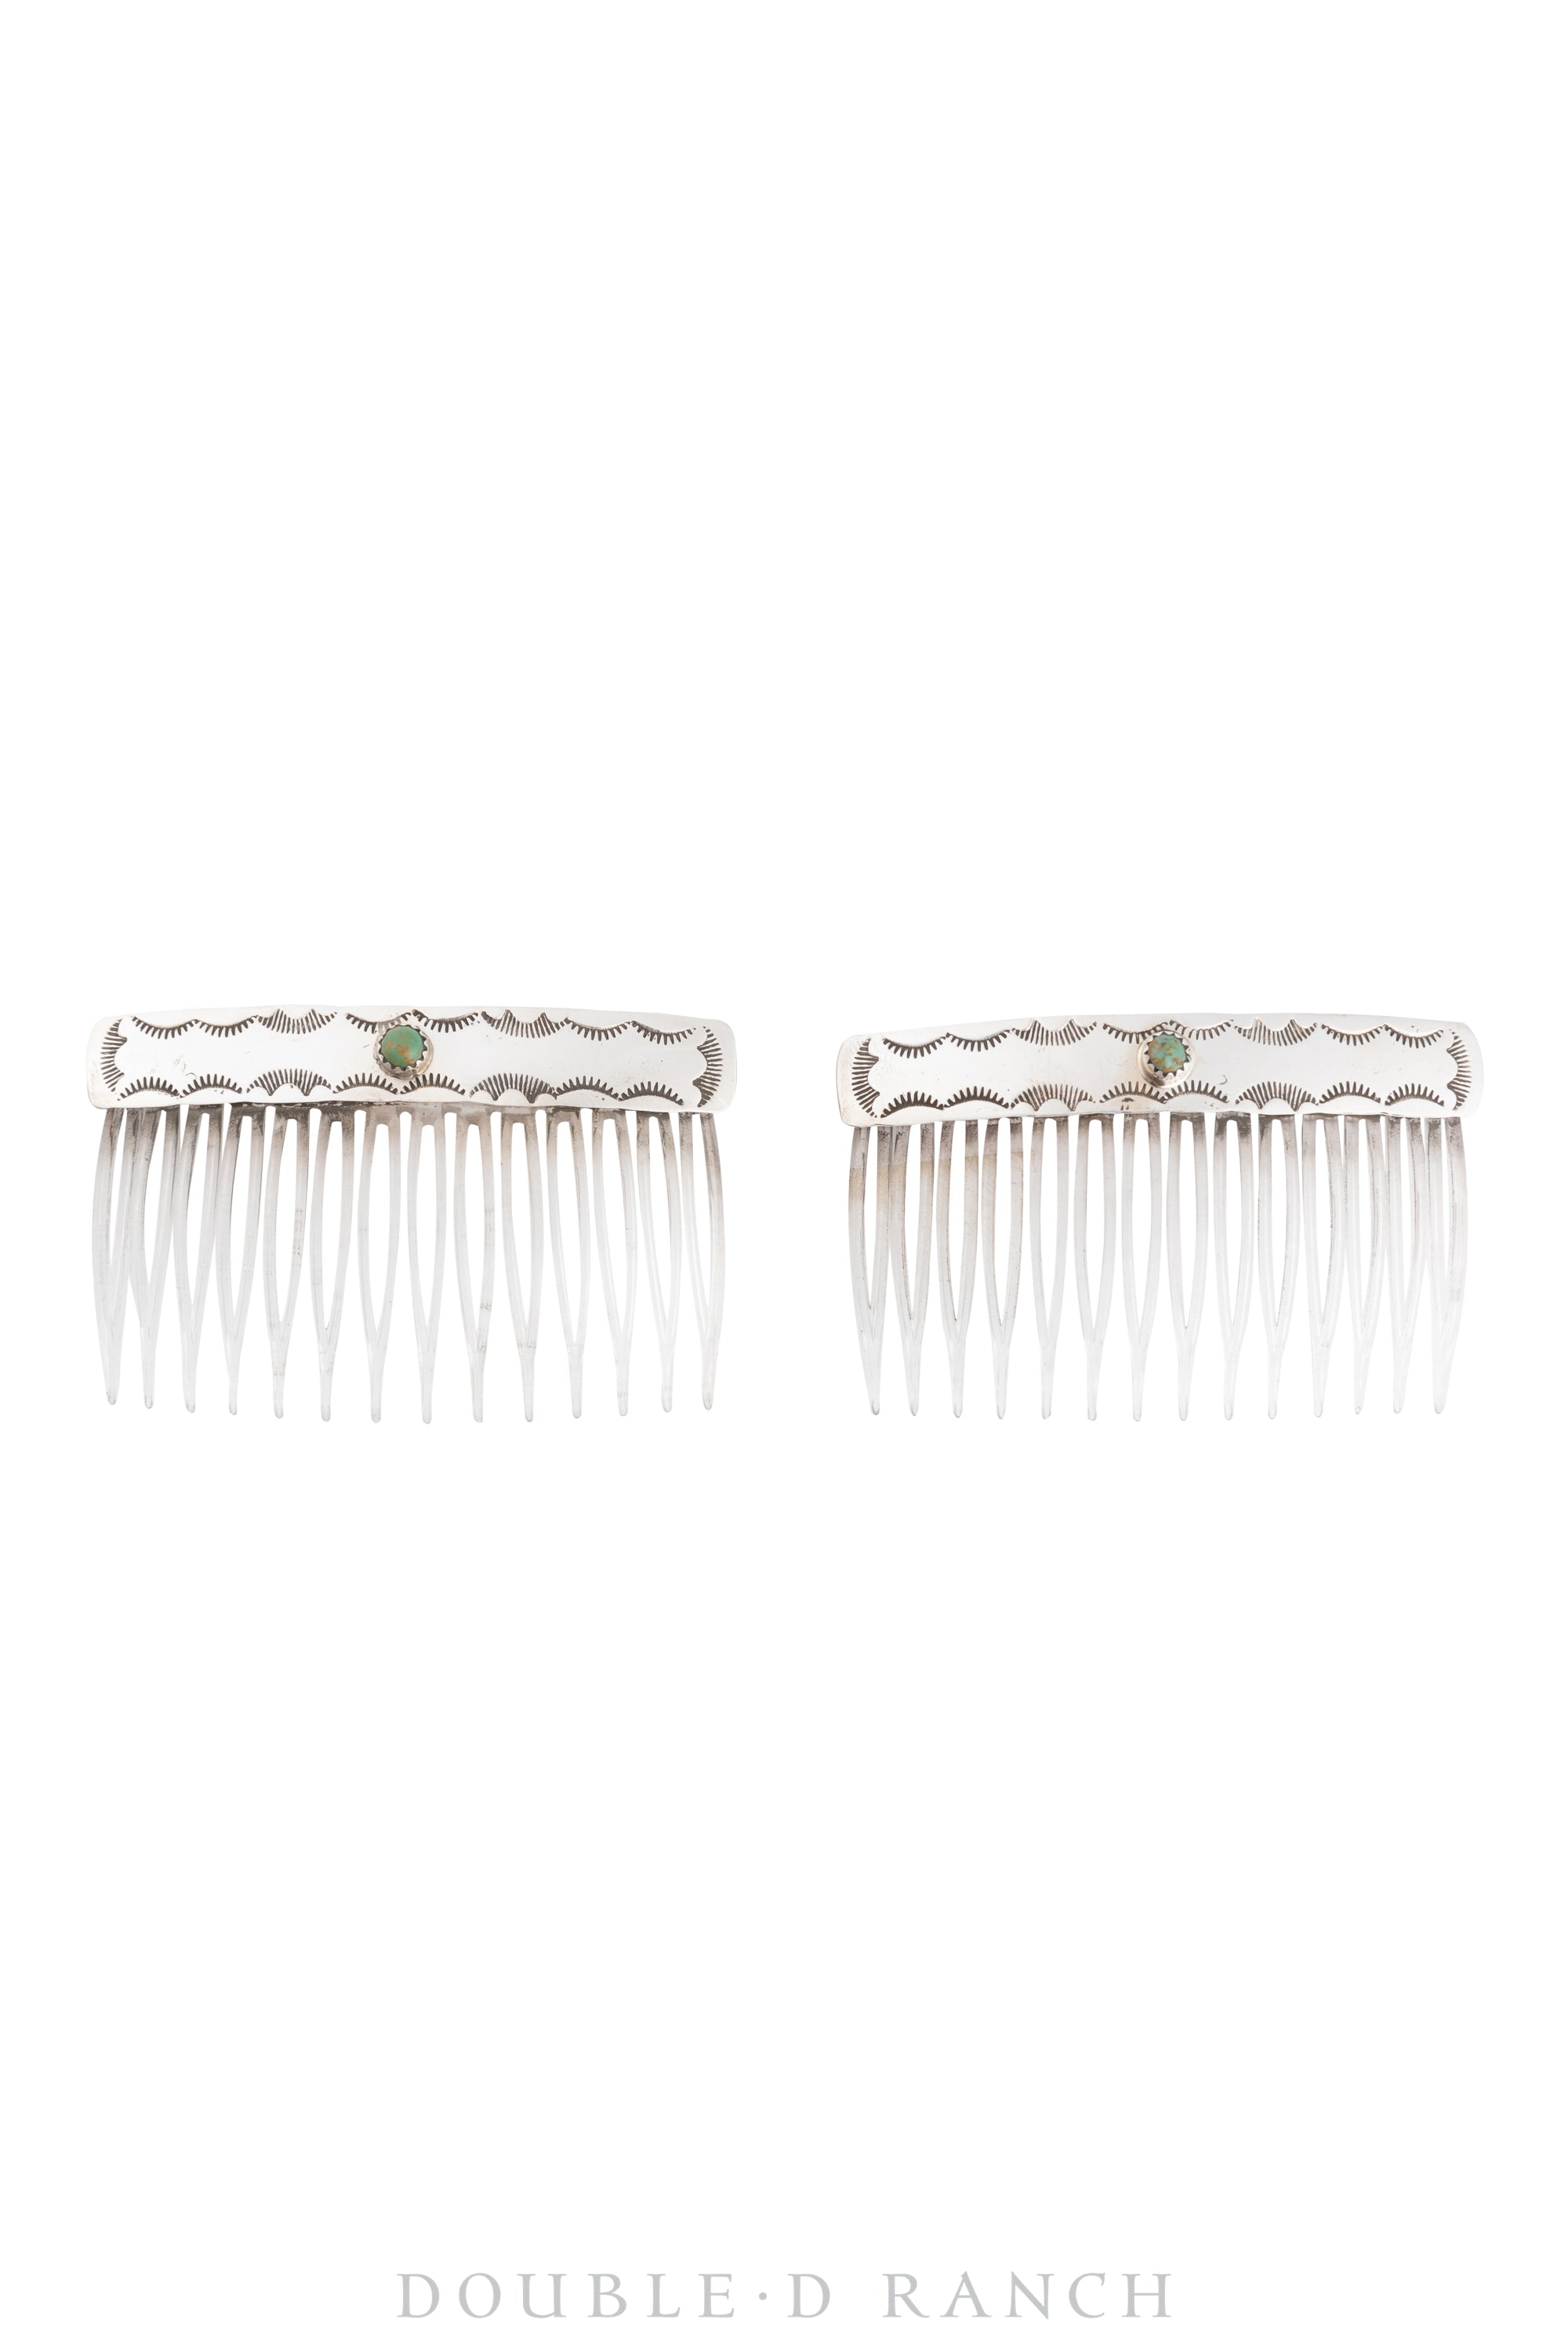 Miscellaneous, Hair Comb, Sterling Silver & Turquoise, Stamping, New Old Stock, 847